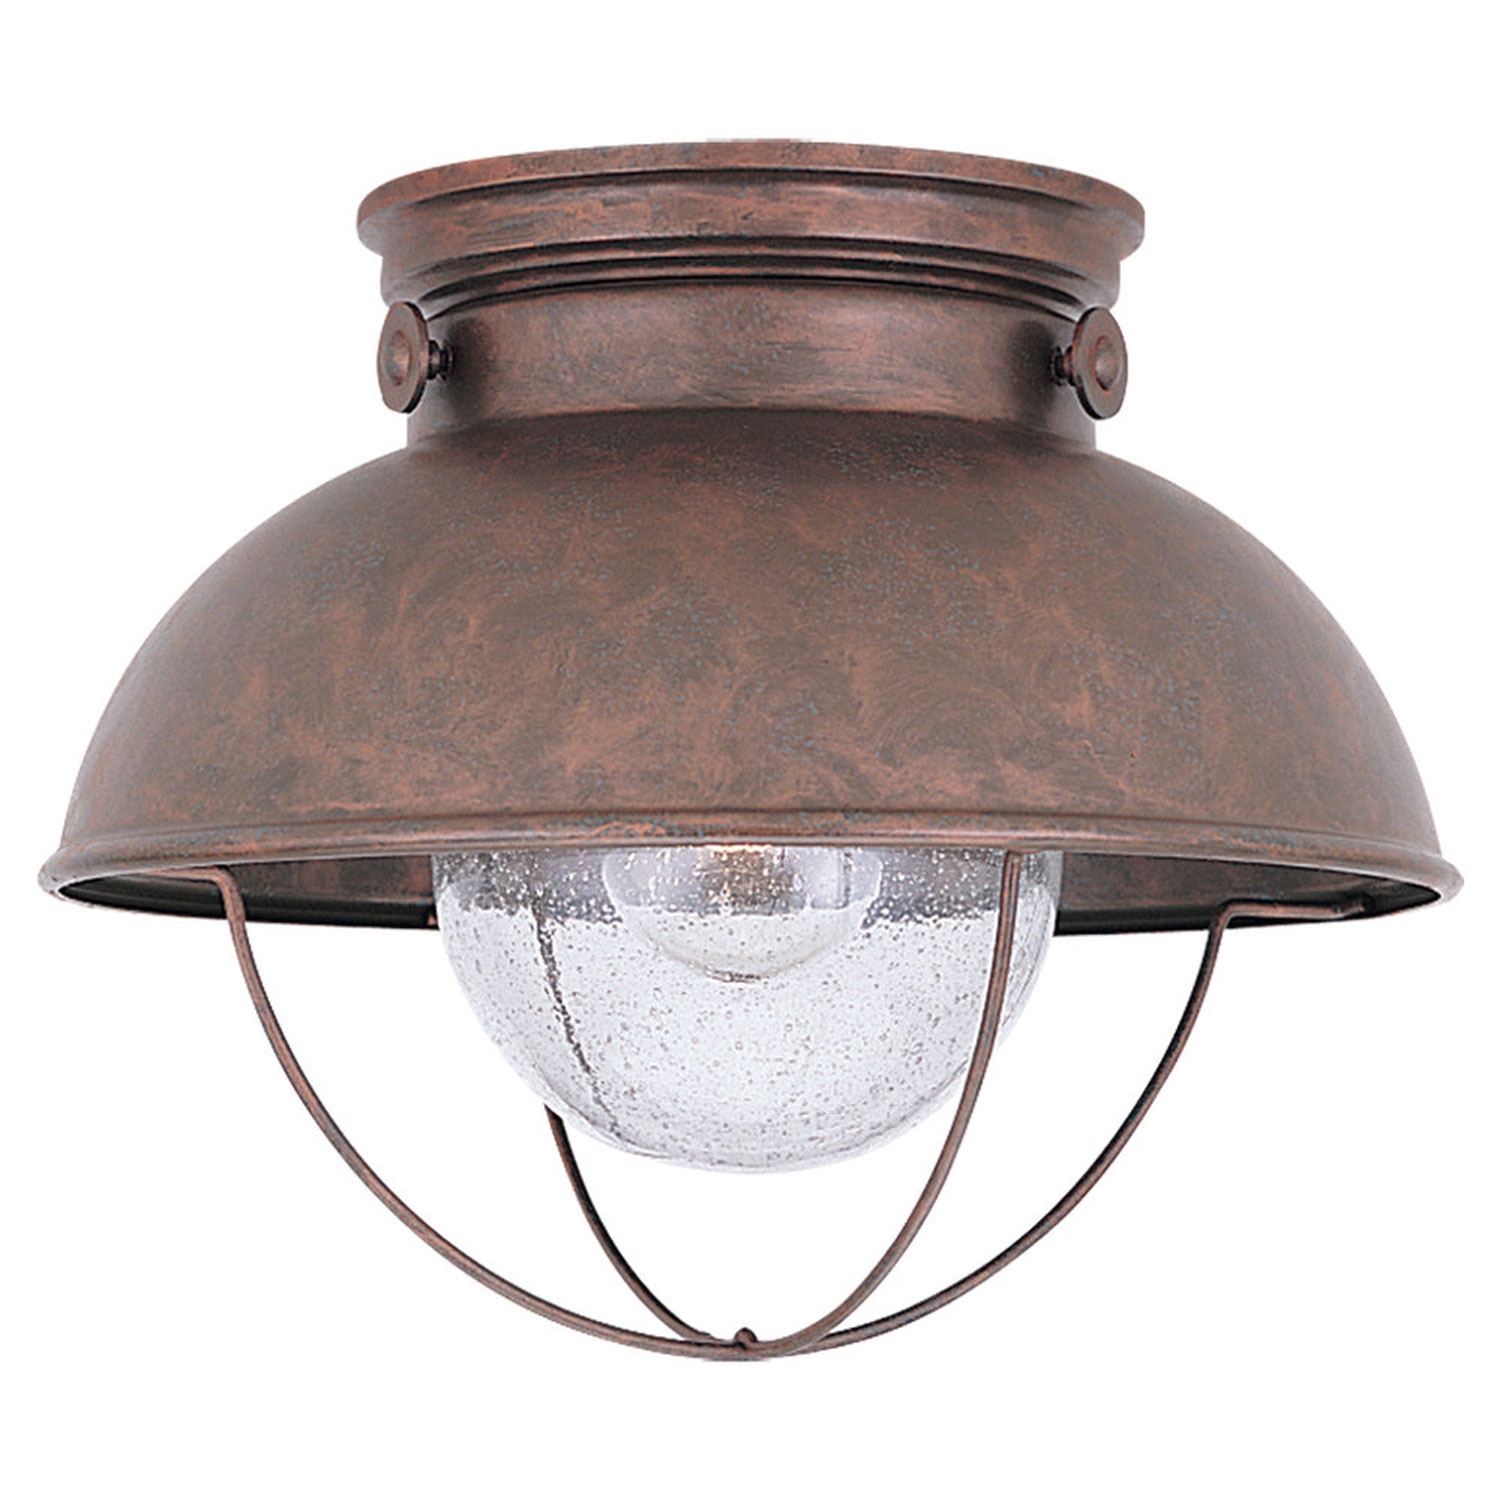 Permalink to Ceiling Mount Outdoor Light